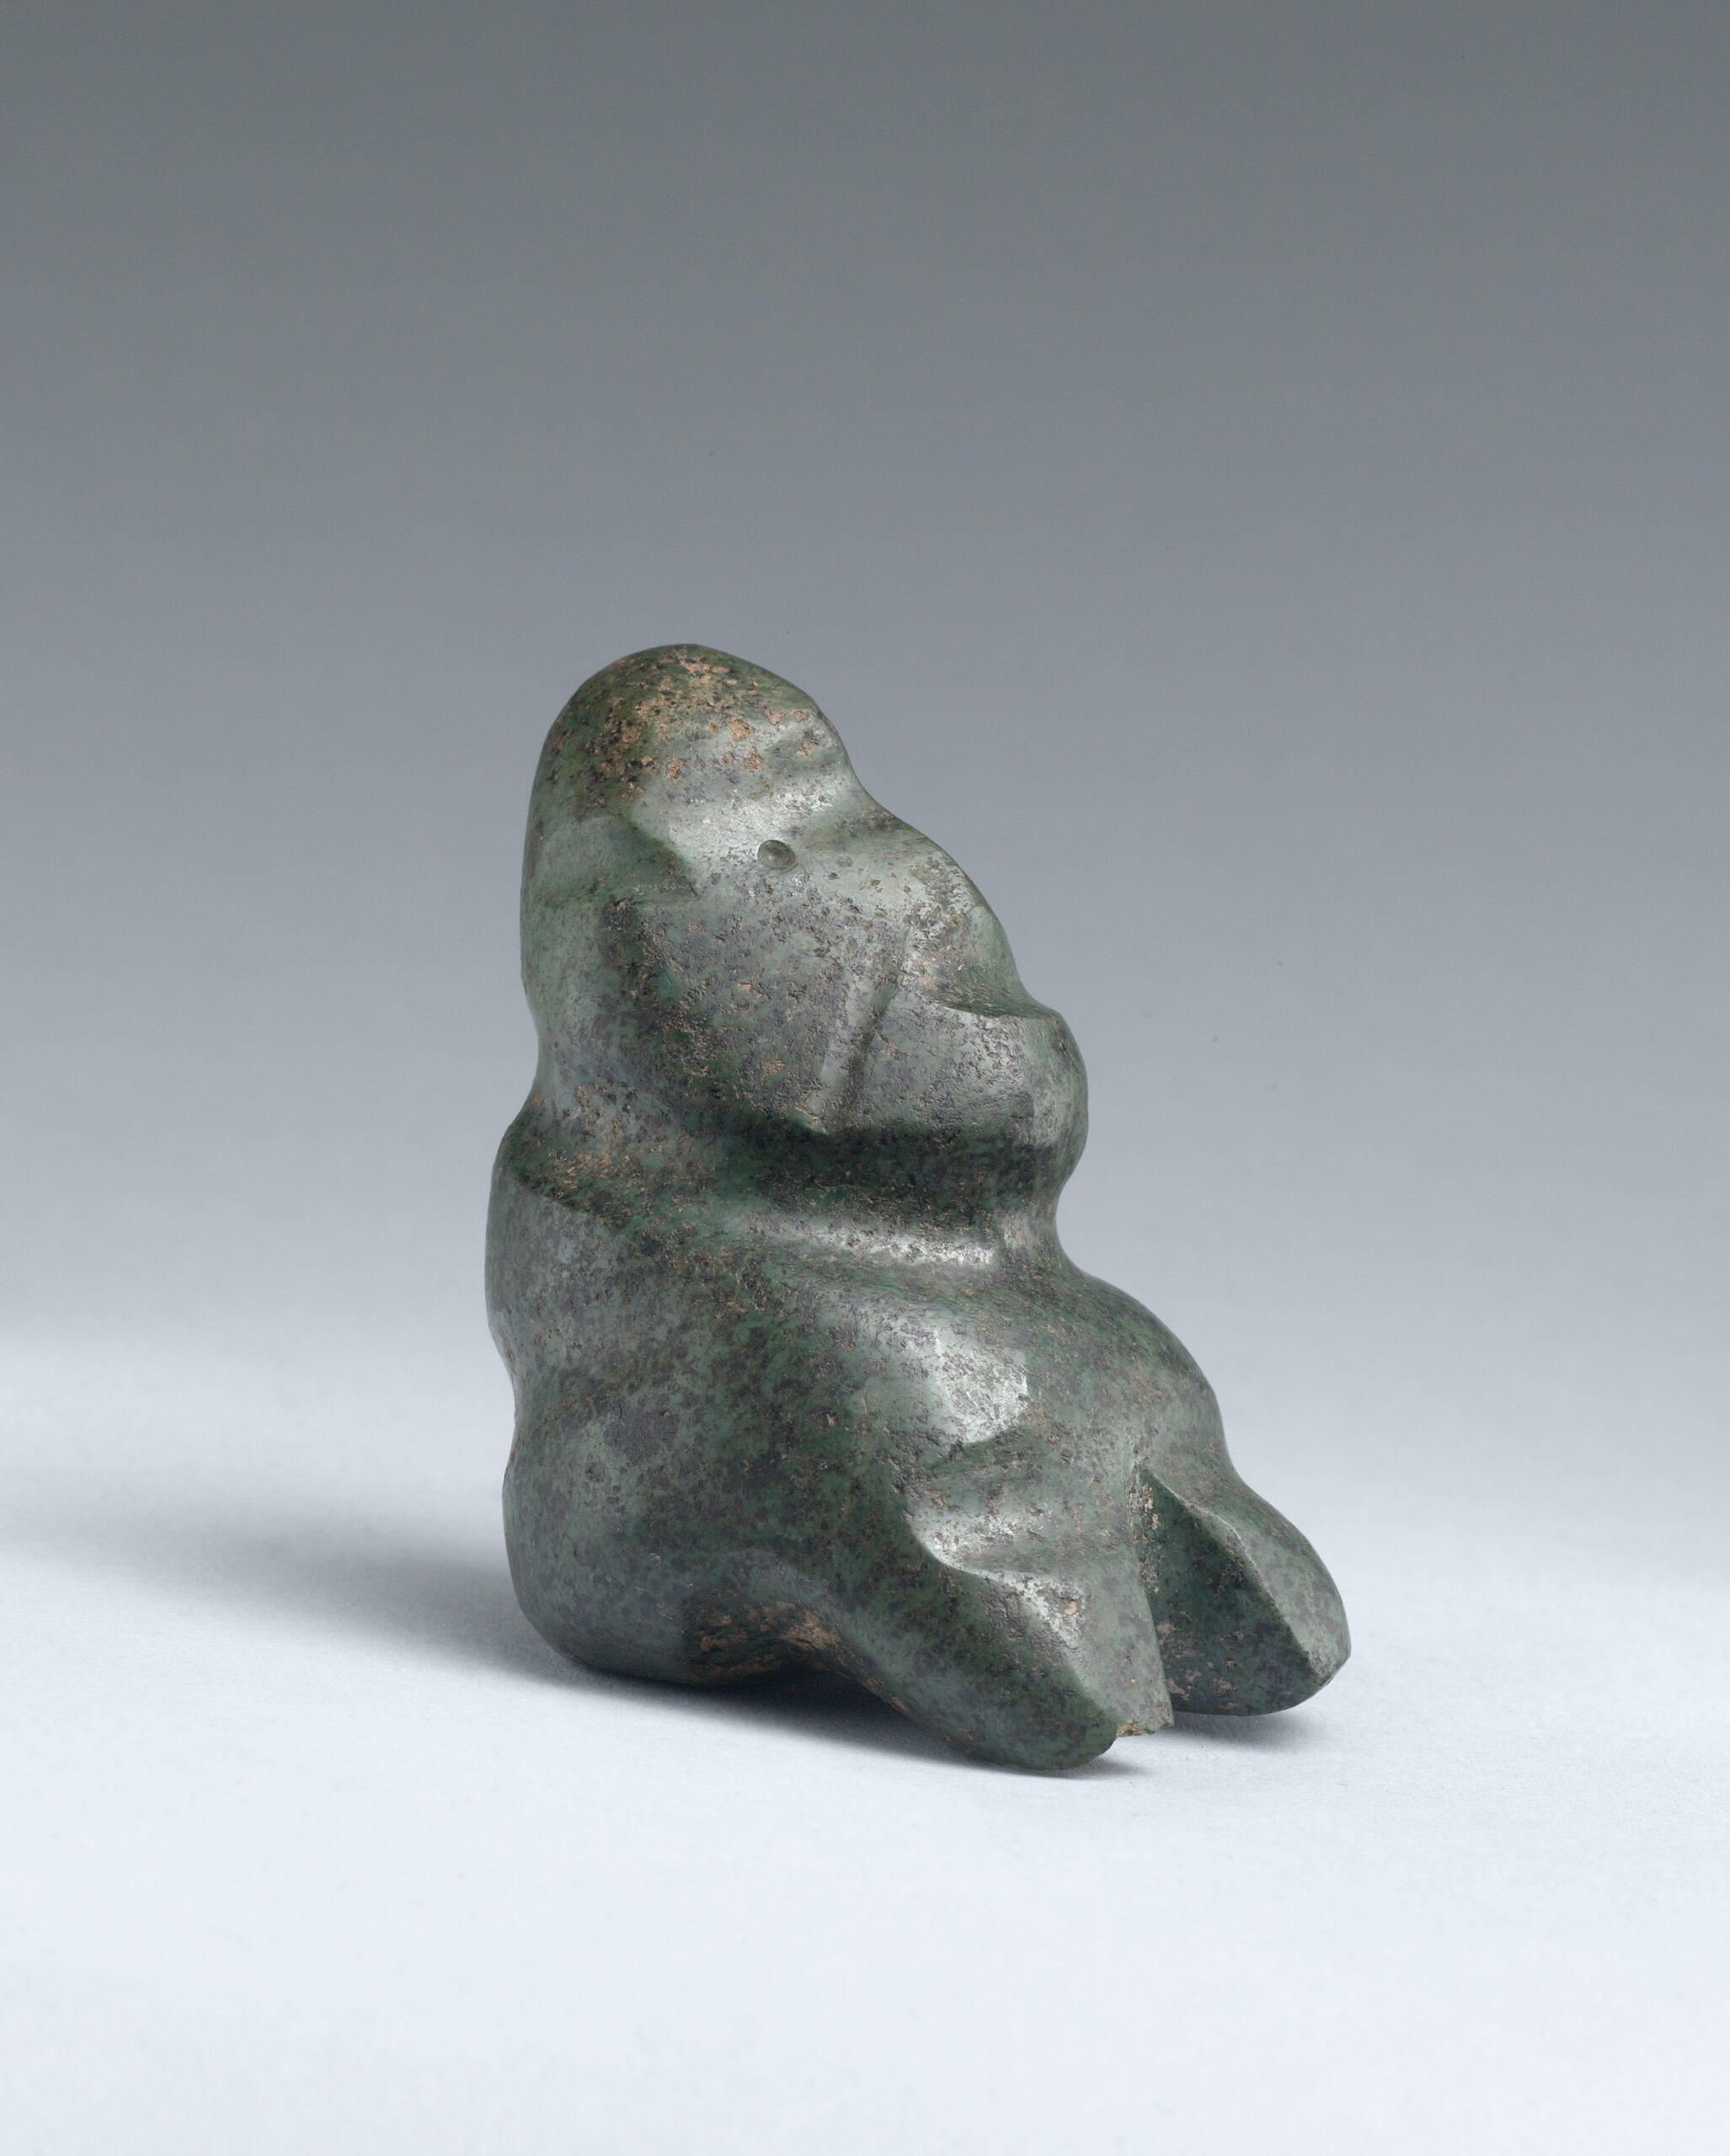 Stone in a rounded abstract form meant to depict a seated figure.